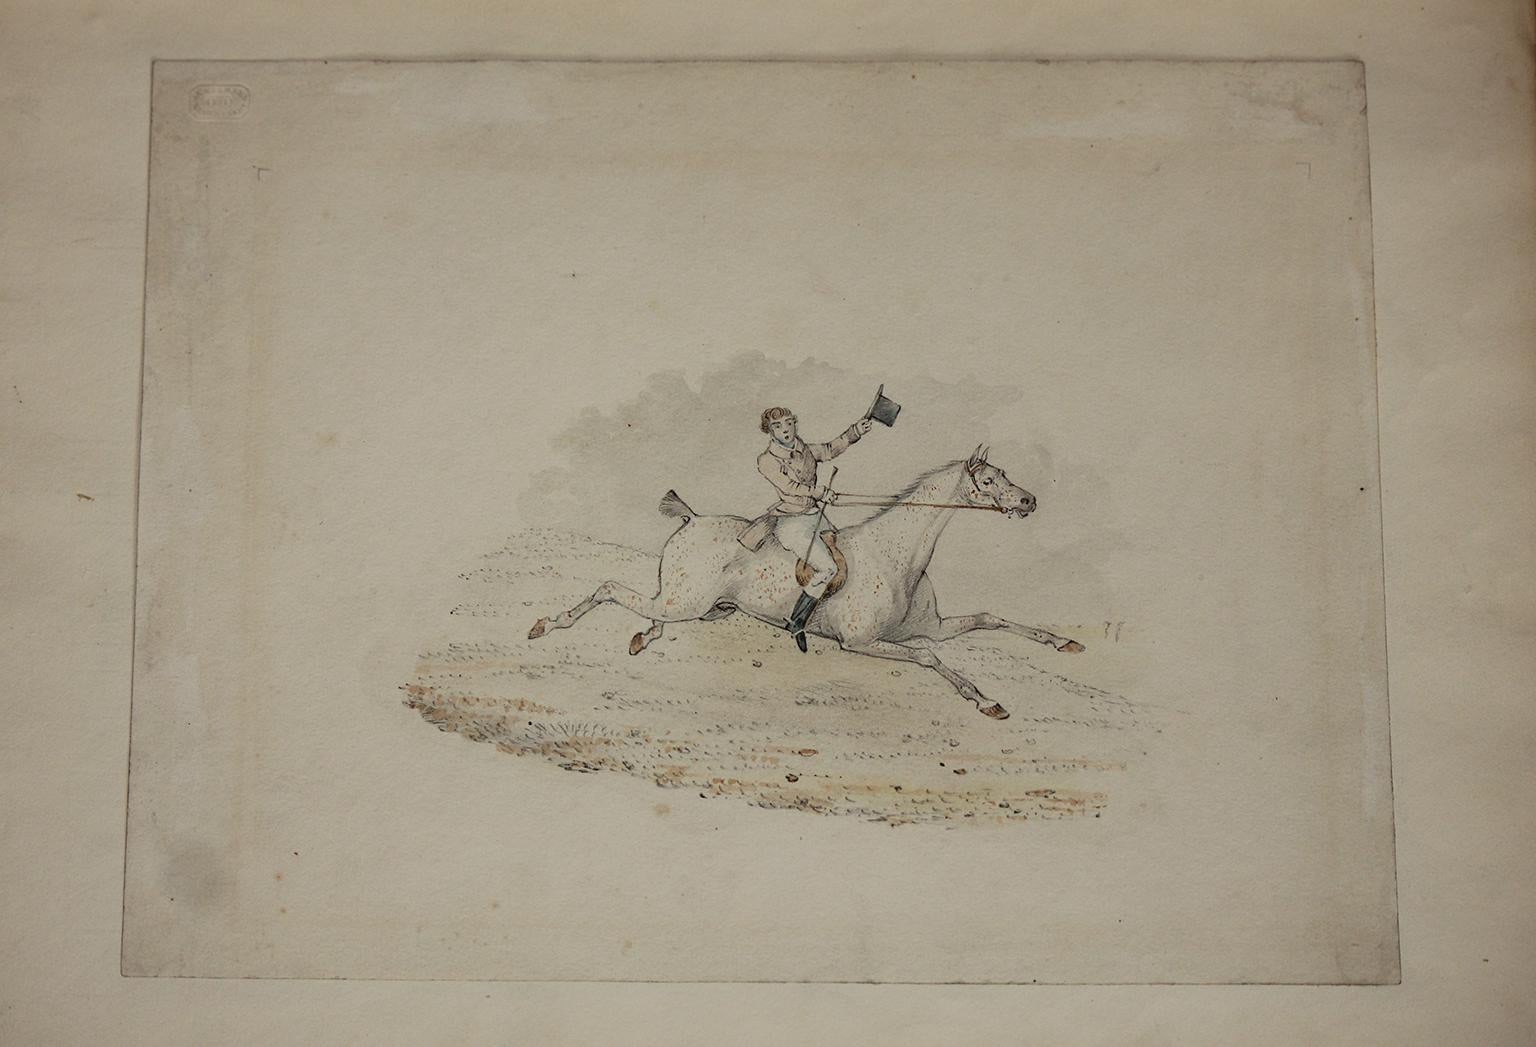 This nineteeth-century album, presumed to have belonged to the Countess of Beauchamp, contains six Henry Alken watercolour and pencil drawings: 'Tally ho', 'Full cry', 'A rider with a hound', 'A huntsman and a hound', 'A rider on a bay', and 'A